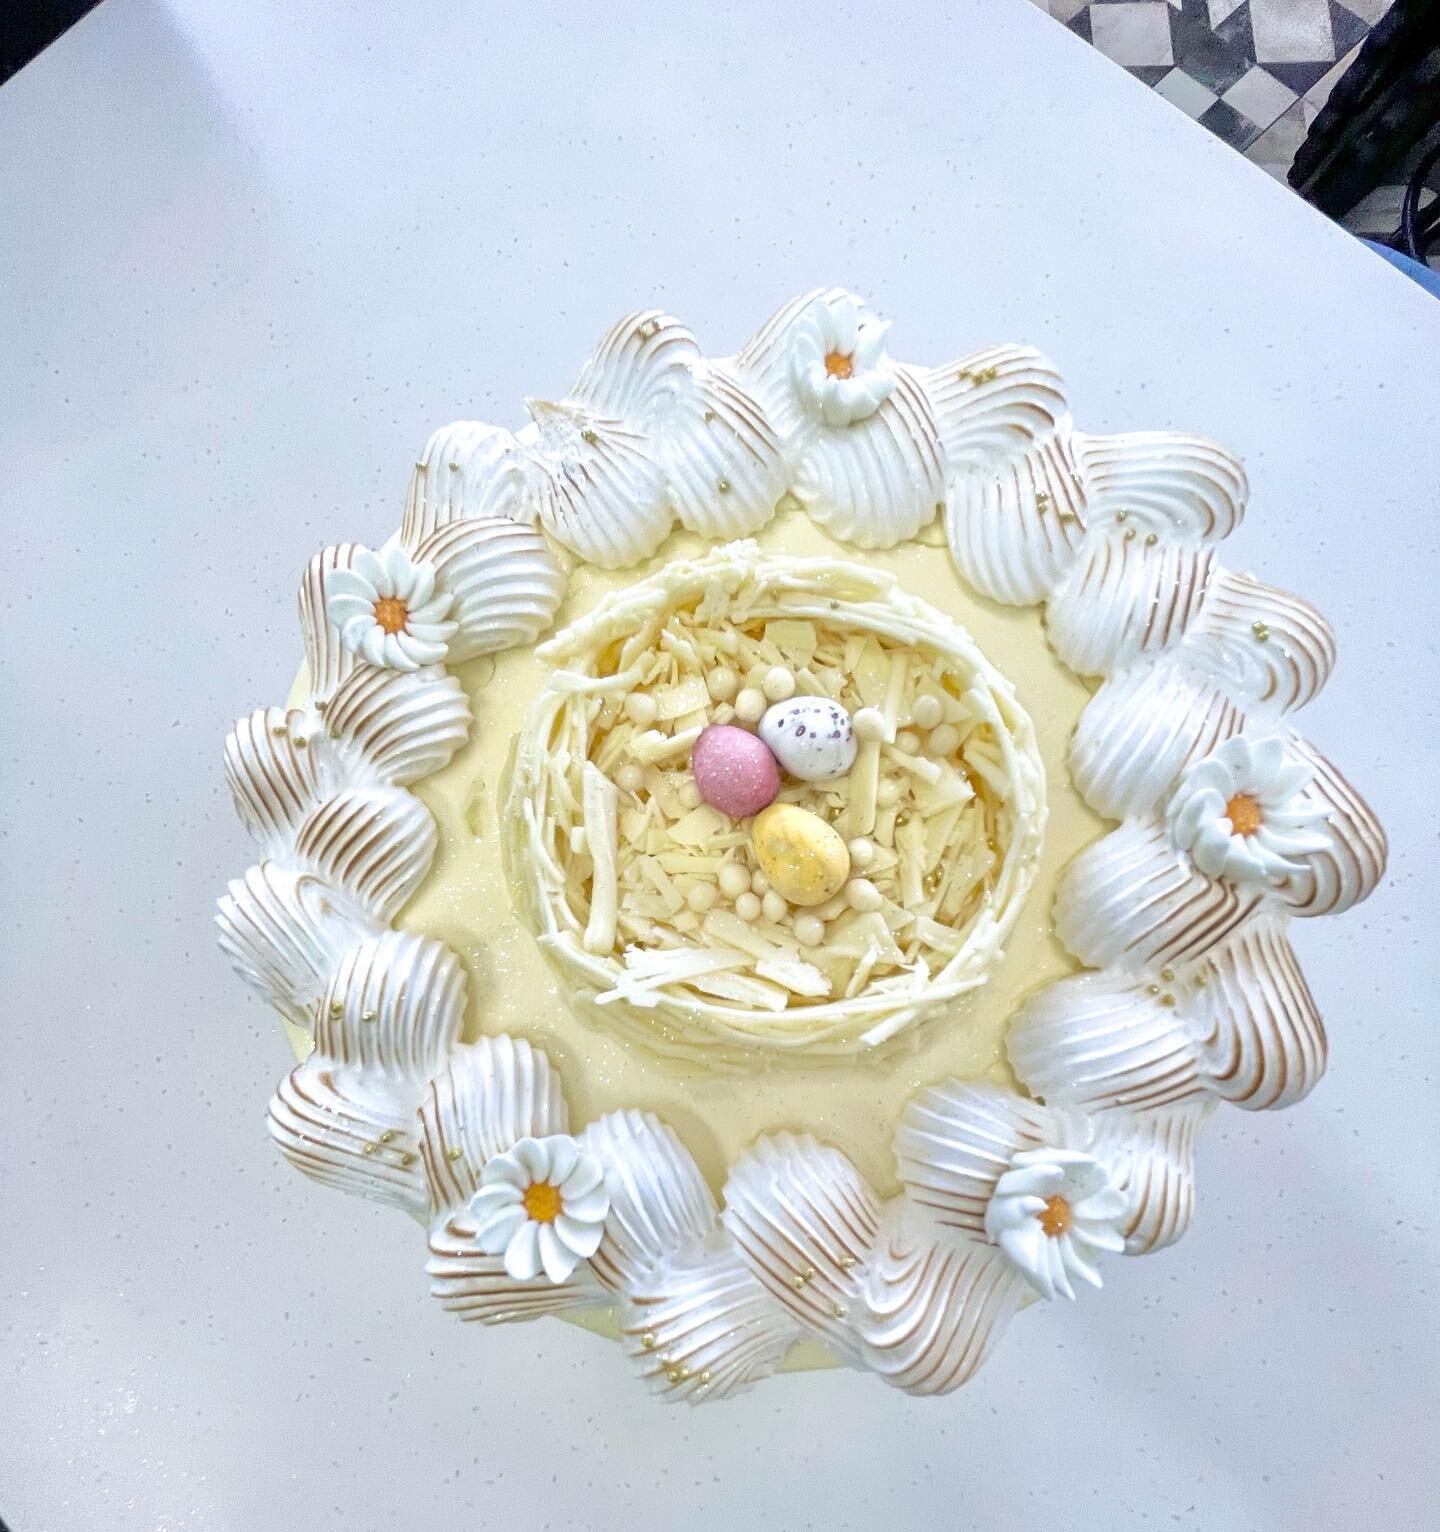 NEW EASTER FLAVOUR ALERT! We will be releasing our special Easter crepe cake flavour tomorrow! There is also a competition coming your way! 

Don&rsquo;t forget to book in for our school holiday Easter kids classes, they are going to be buckets of fu